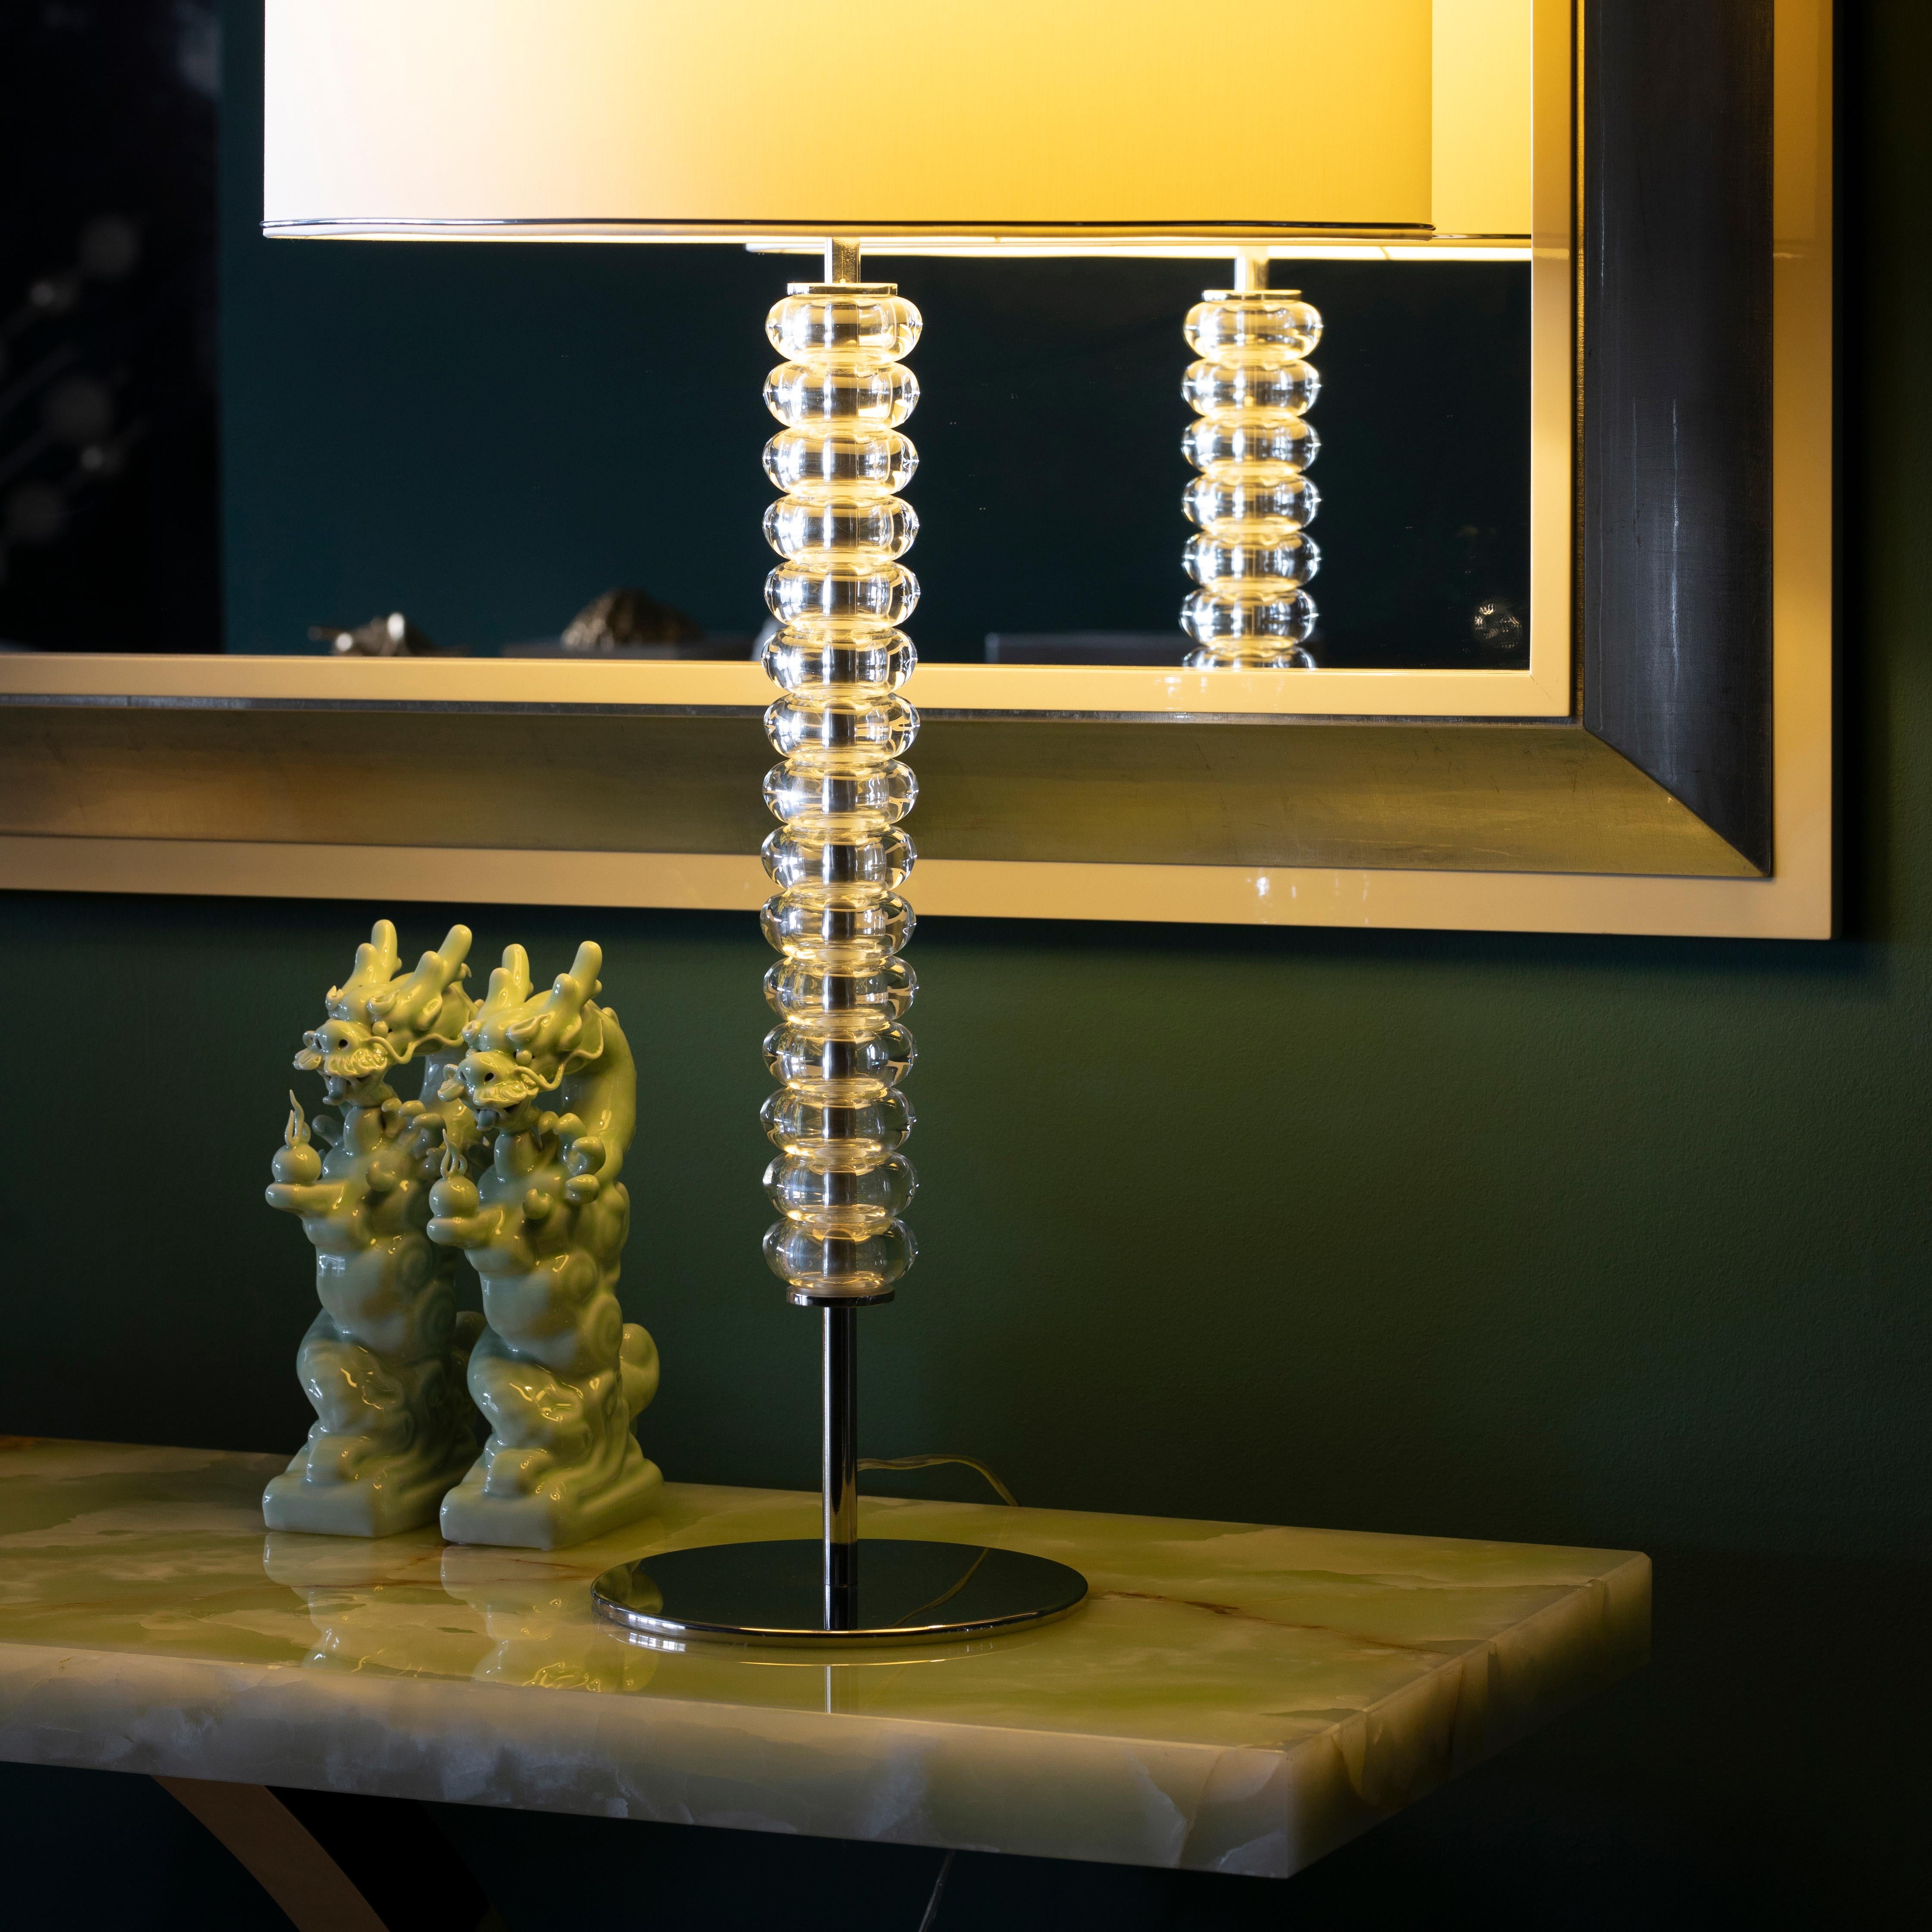 Set of 2 Saldanha table lamps, Modern Collection, Handcrafted in Portugal - Europe by GF Modern.

A luxurious table lamp, Saldanha creates the subliminal ambiance for exceptional living. The clear-glass spheres harmonize the wonderful contrast